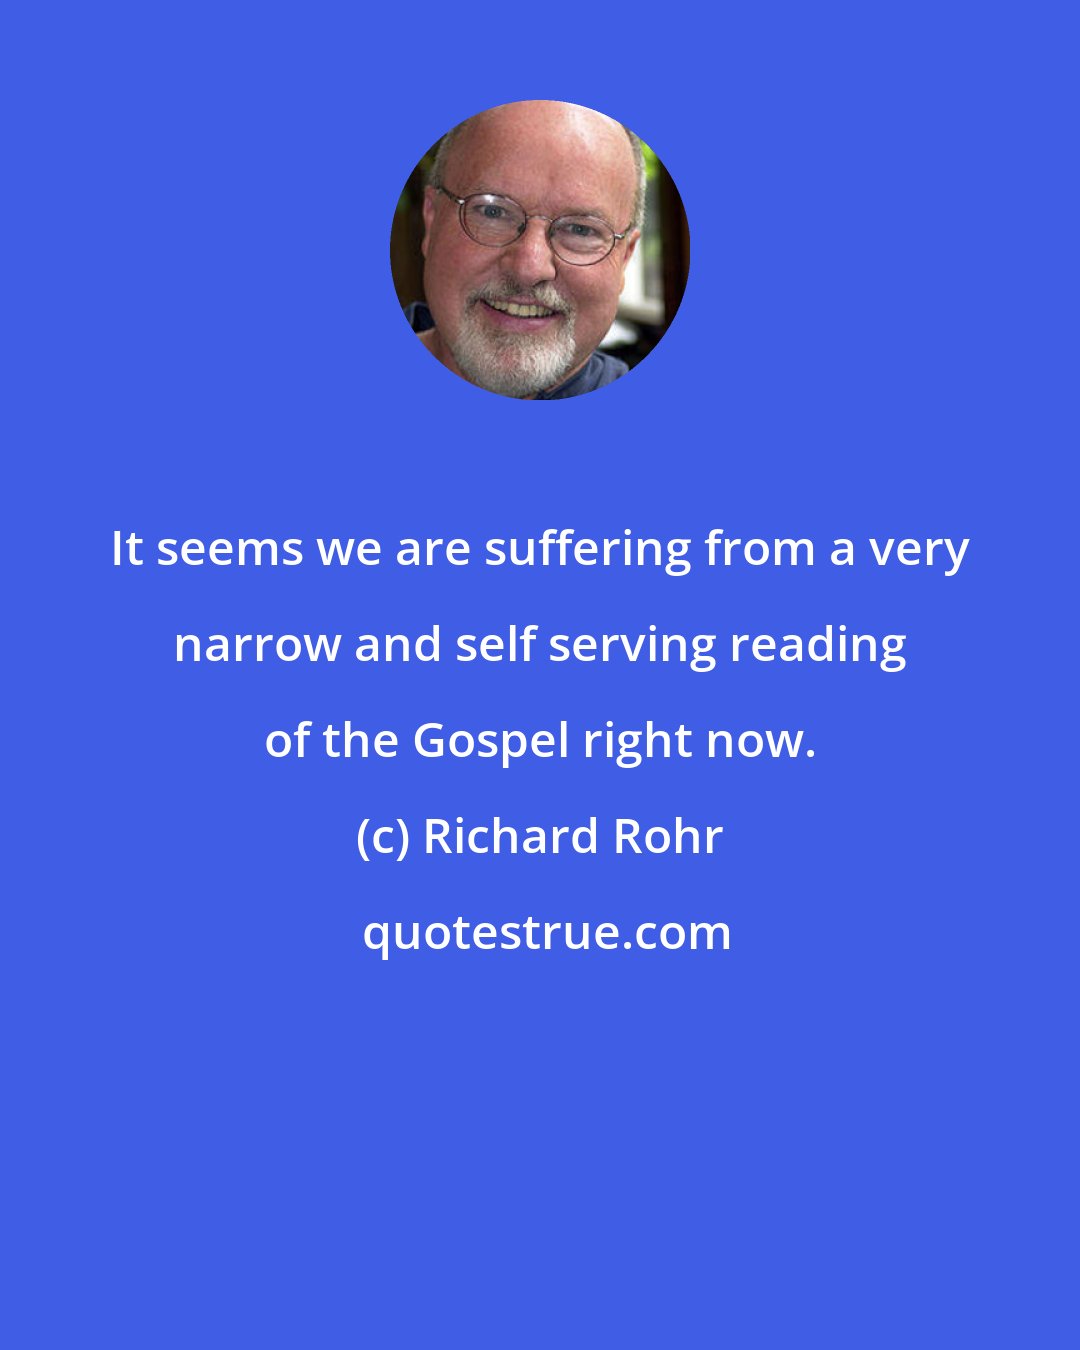 Richard Rohr: It seems we are suffering from a very narrow and self serving reading of the Gospel right now.